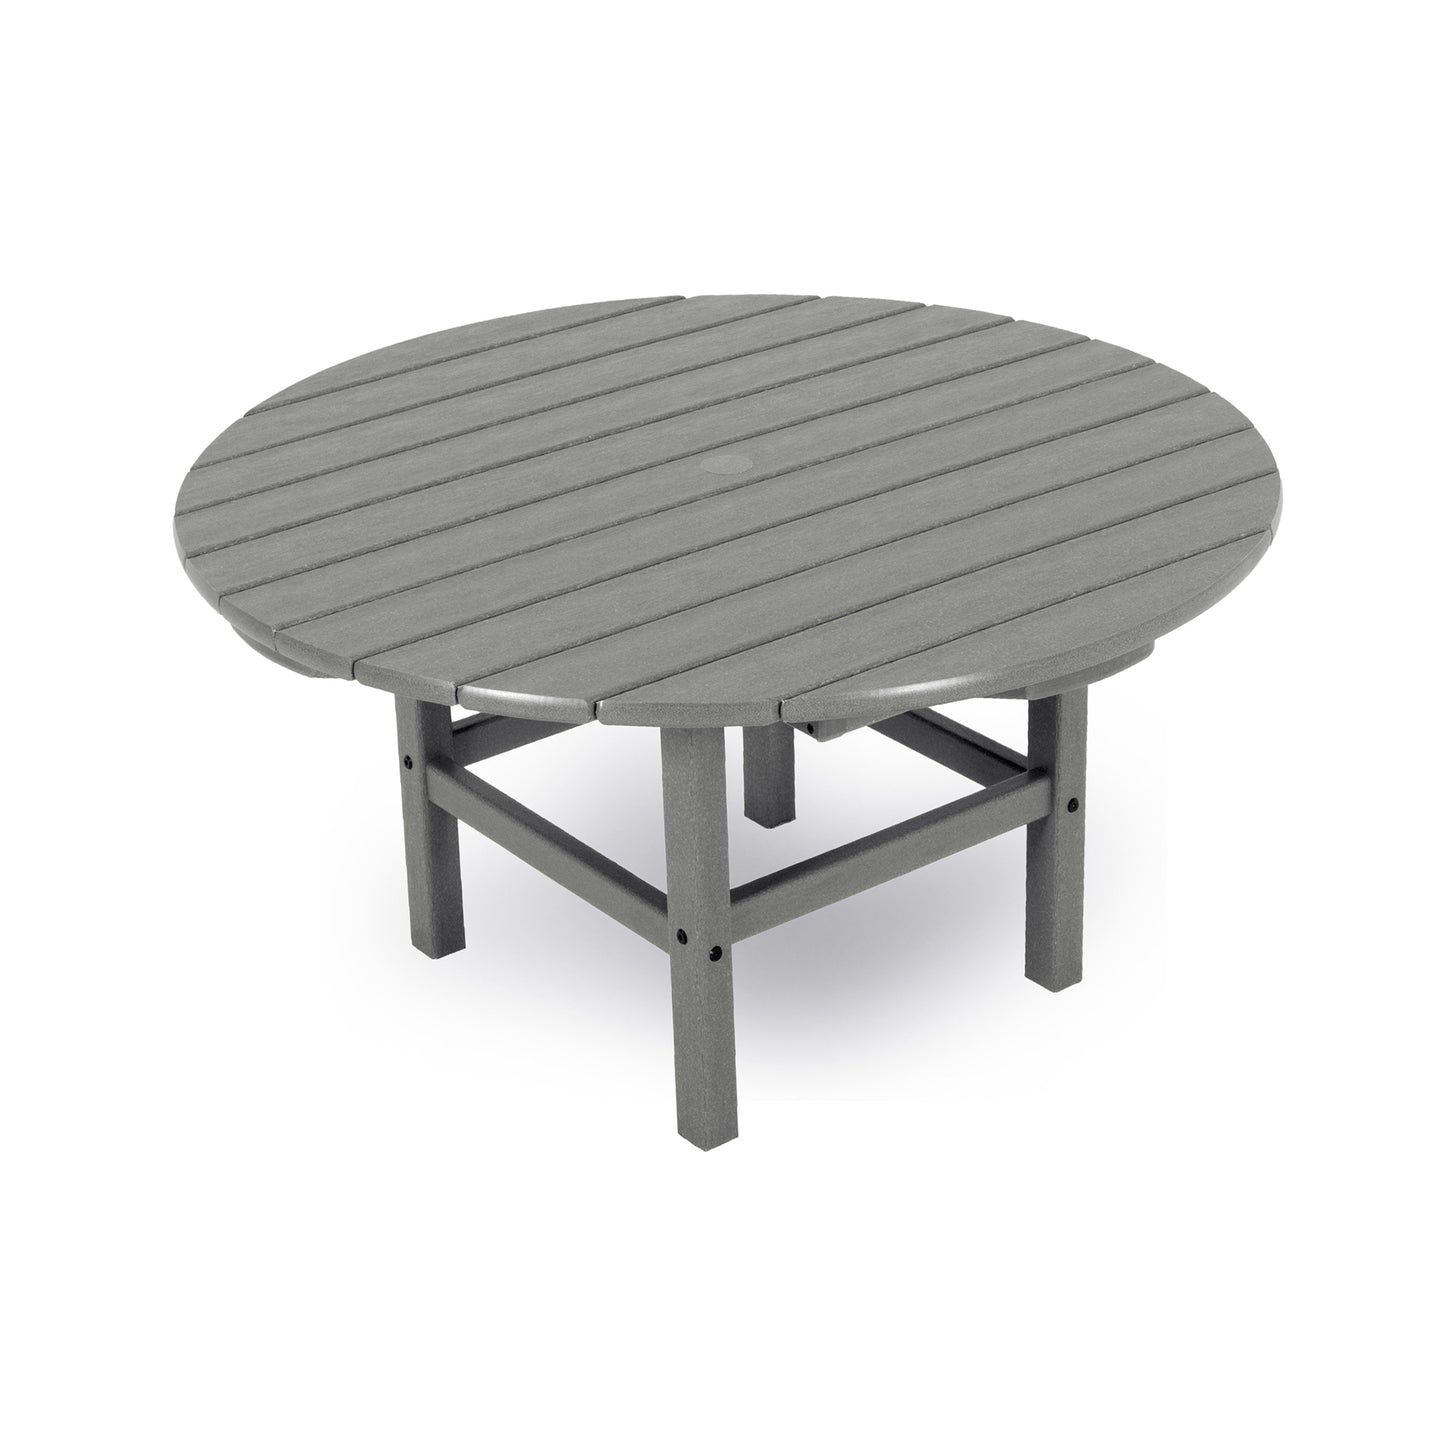 A round, grey, POLYWOOD® Outdoor 38" Conversation Table with horizontal slat top and sturdy legs, isolated on a white background.